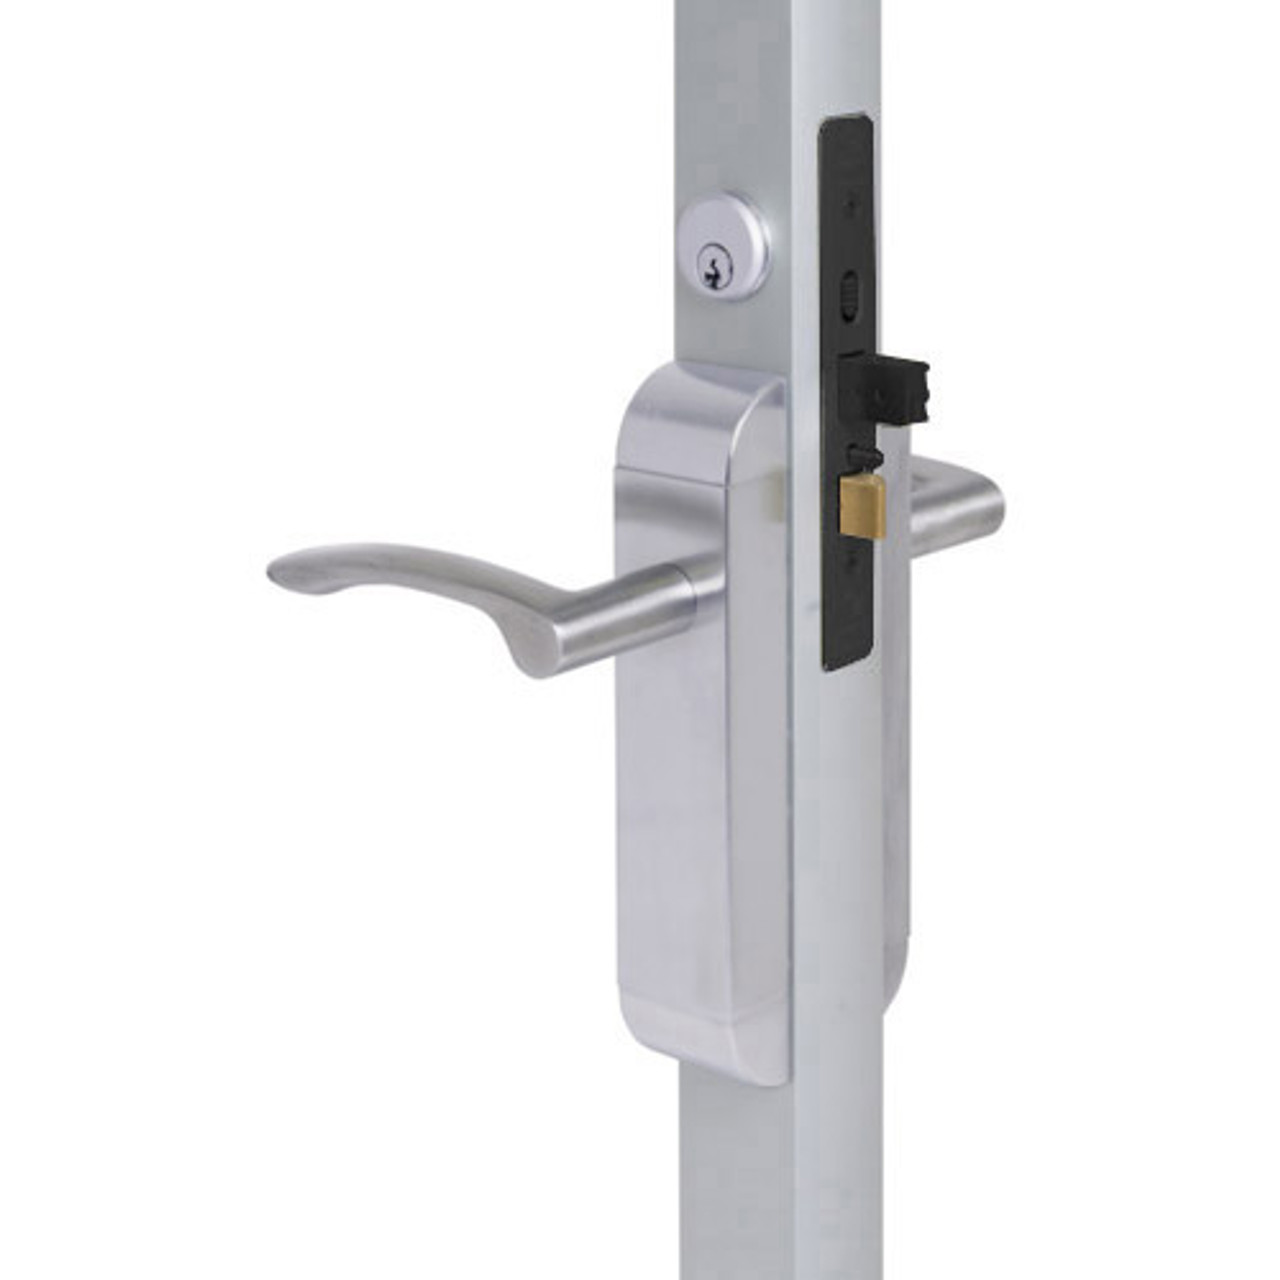 2190-423-203-32 Adams Rite Dual Force Interconnected 2190 series Deadlock/Deadlatch in Bright Stainless